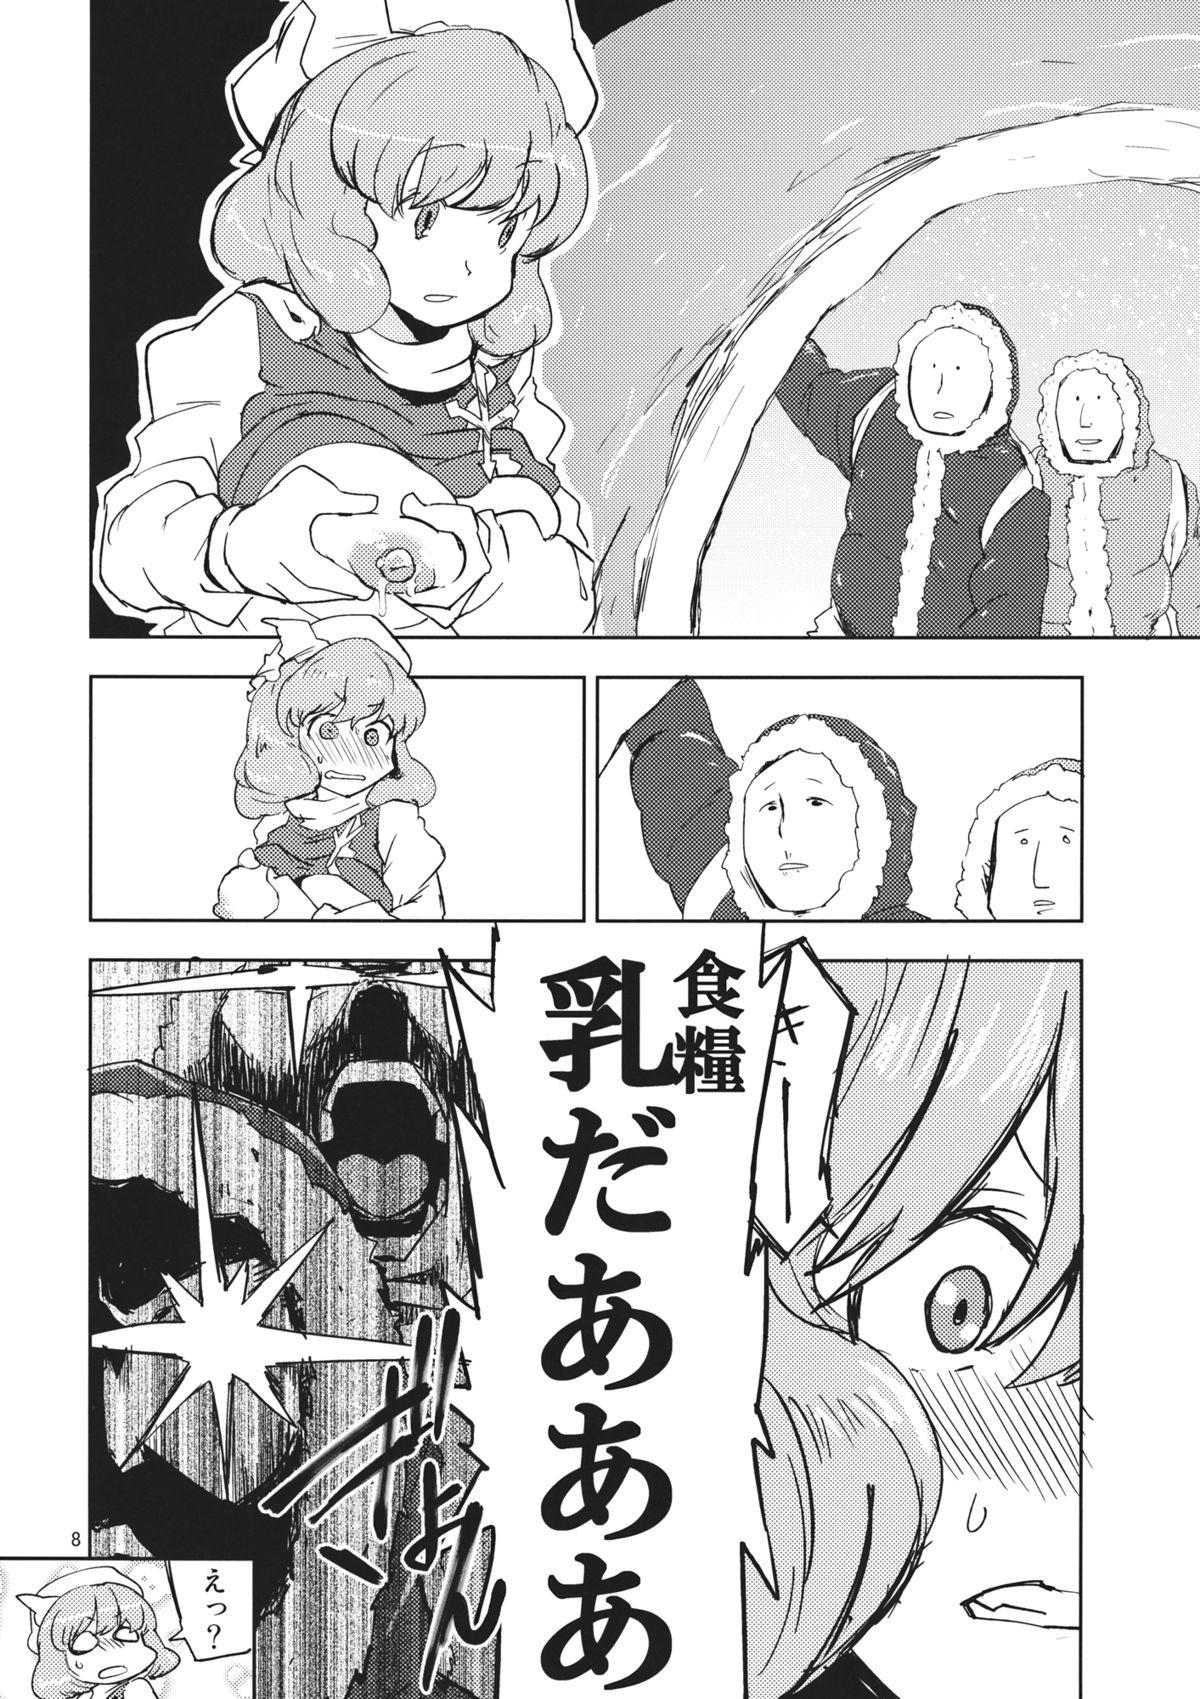 Whipping Letty White Milk Kudasai! - Touhou project Indo - Page 8